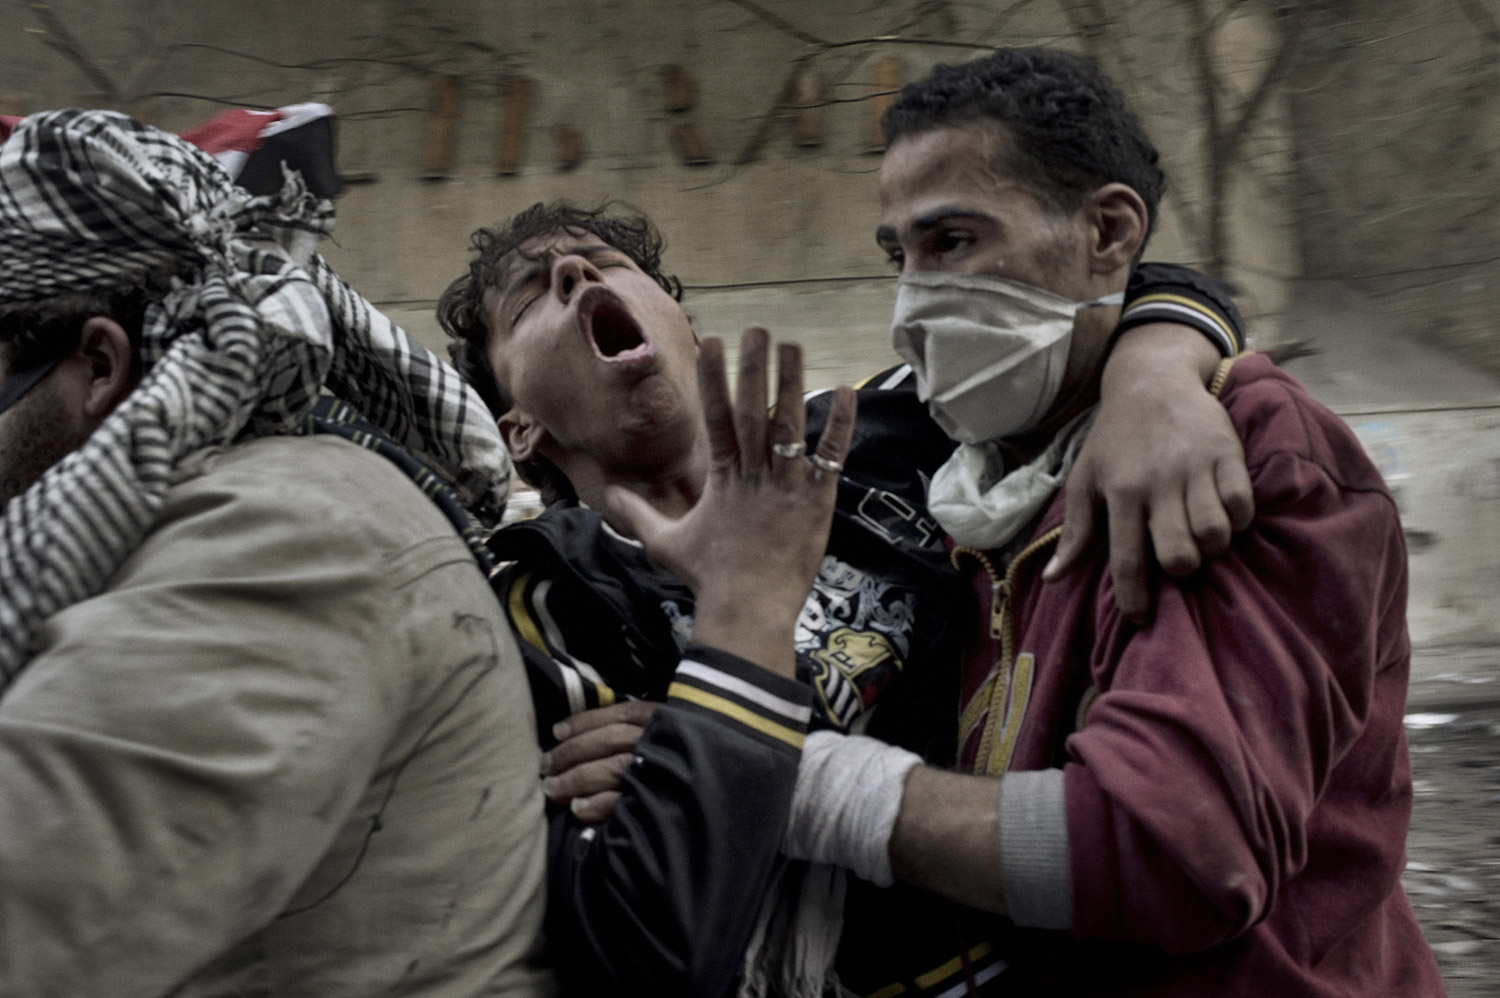 A protester overcome by tear gas is evacuated from Mohamed Mahmoud street, November 23, 2011.